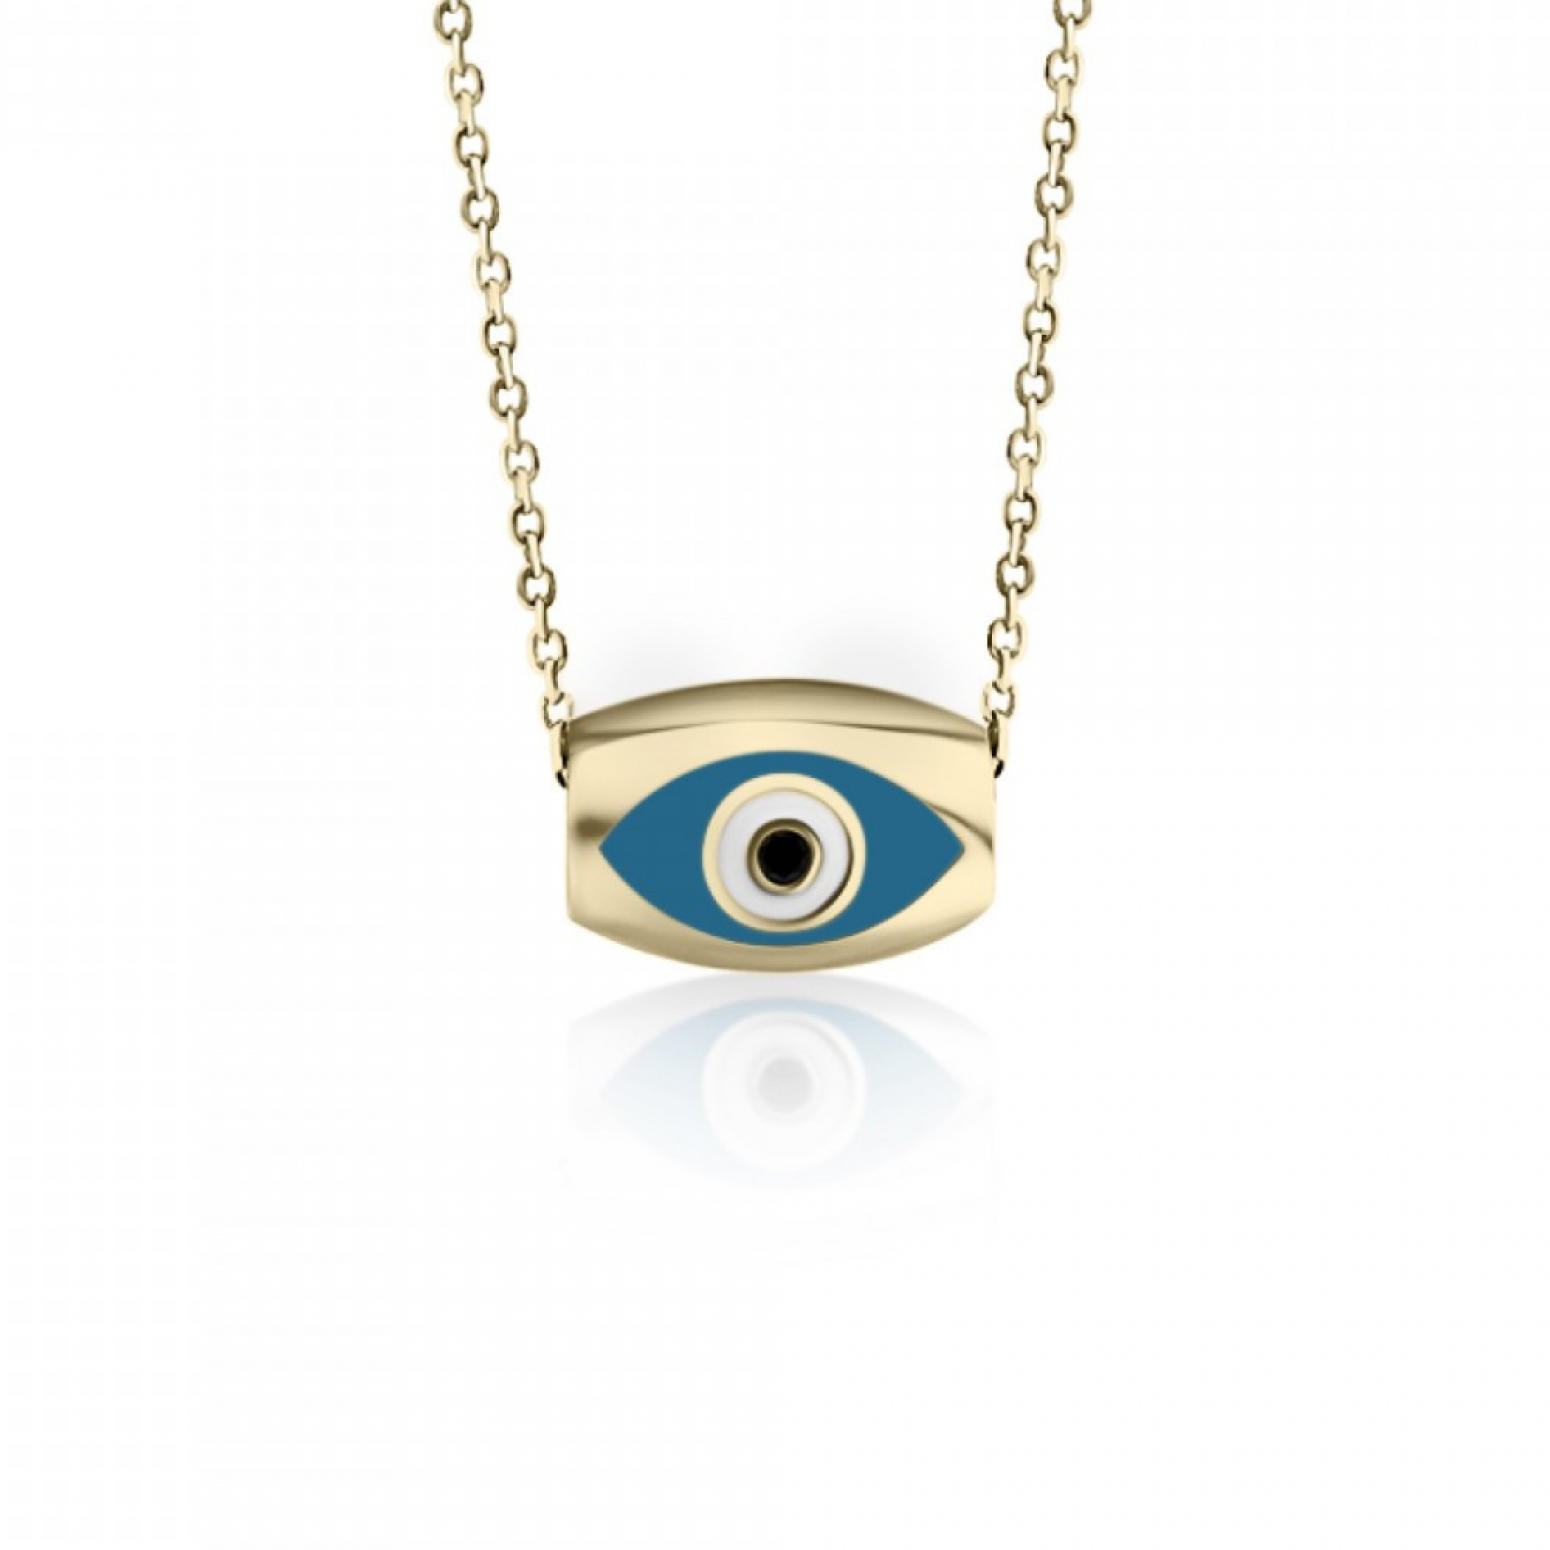 Eye necklace, Κ9 gold with enamel and spinel, ko4733 NECKLACES Κοσμηματα - chrilia.gr